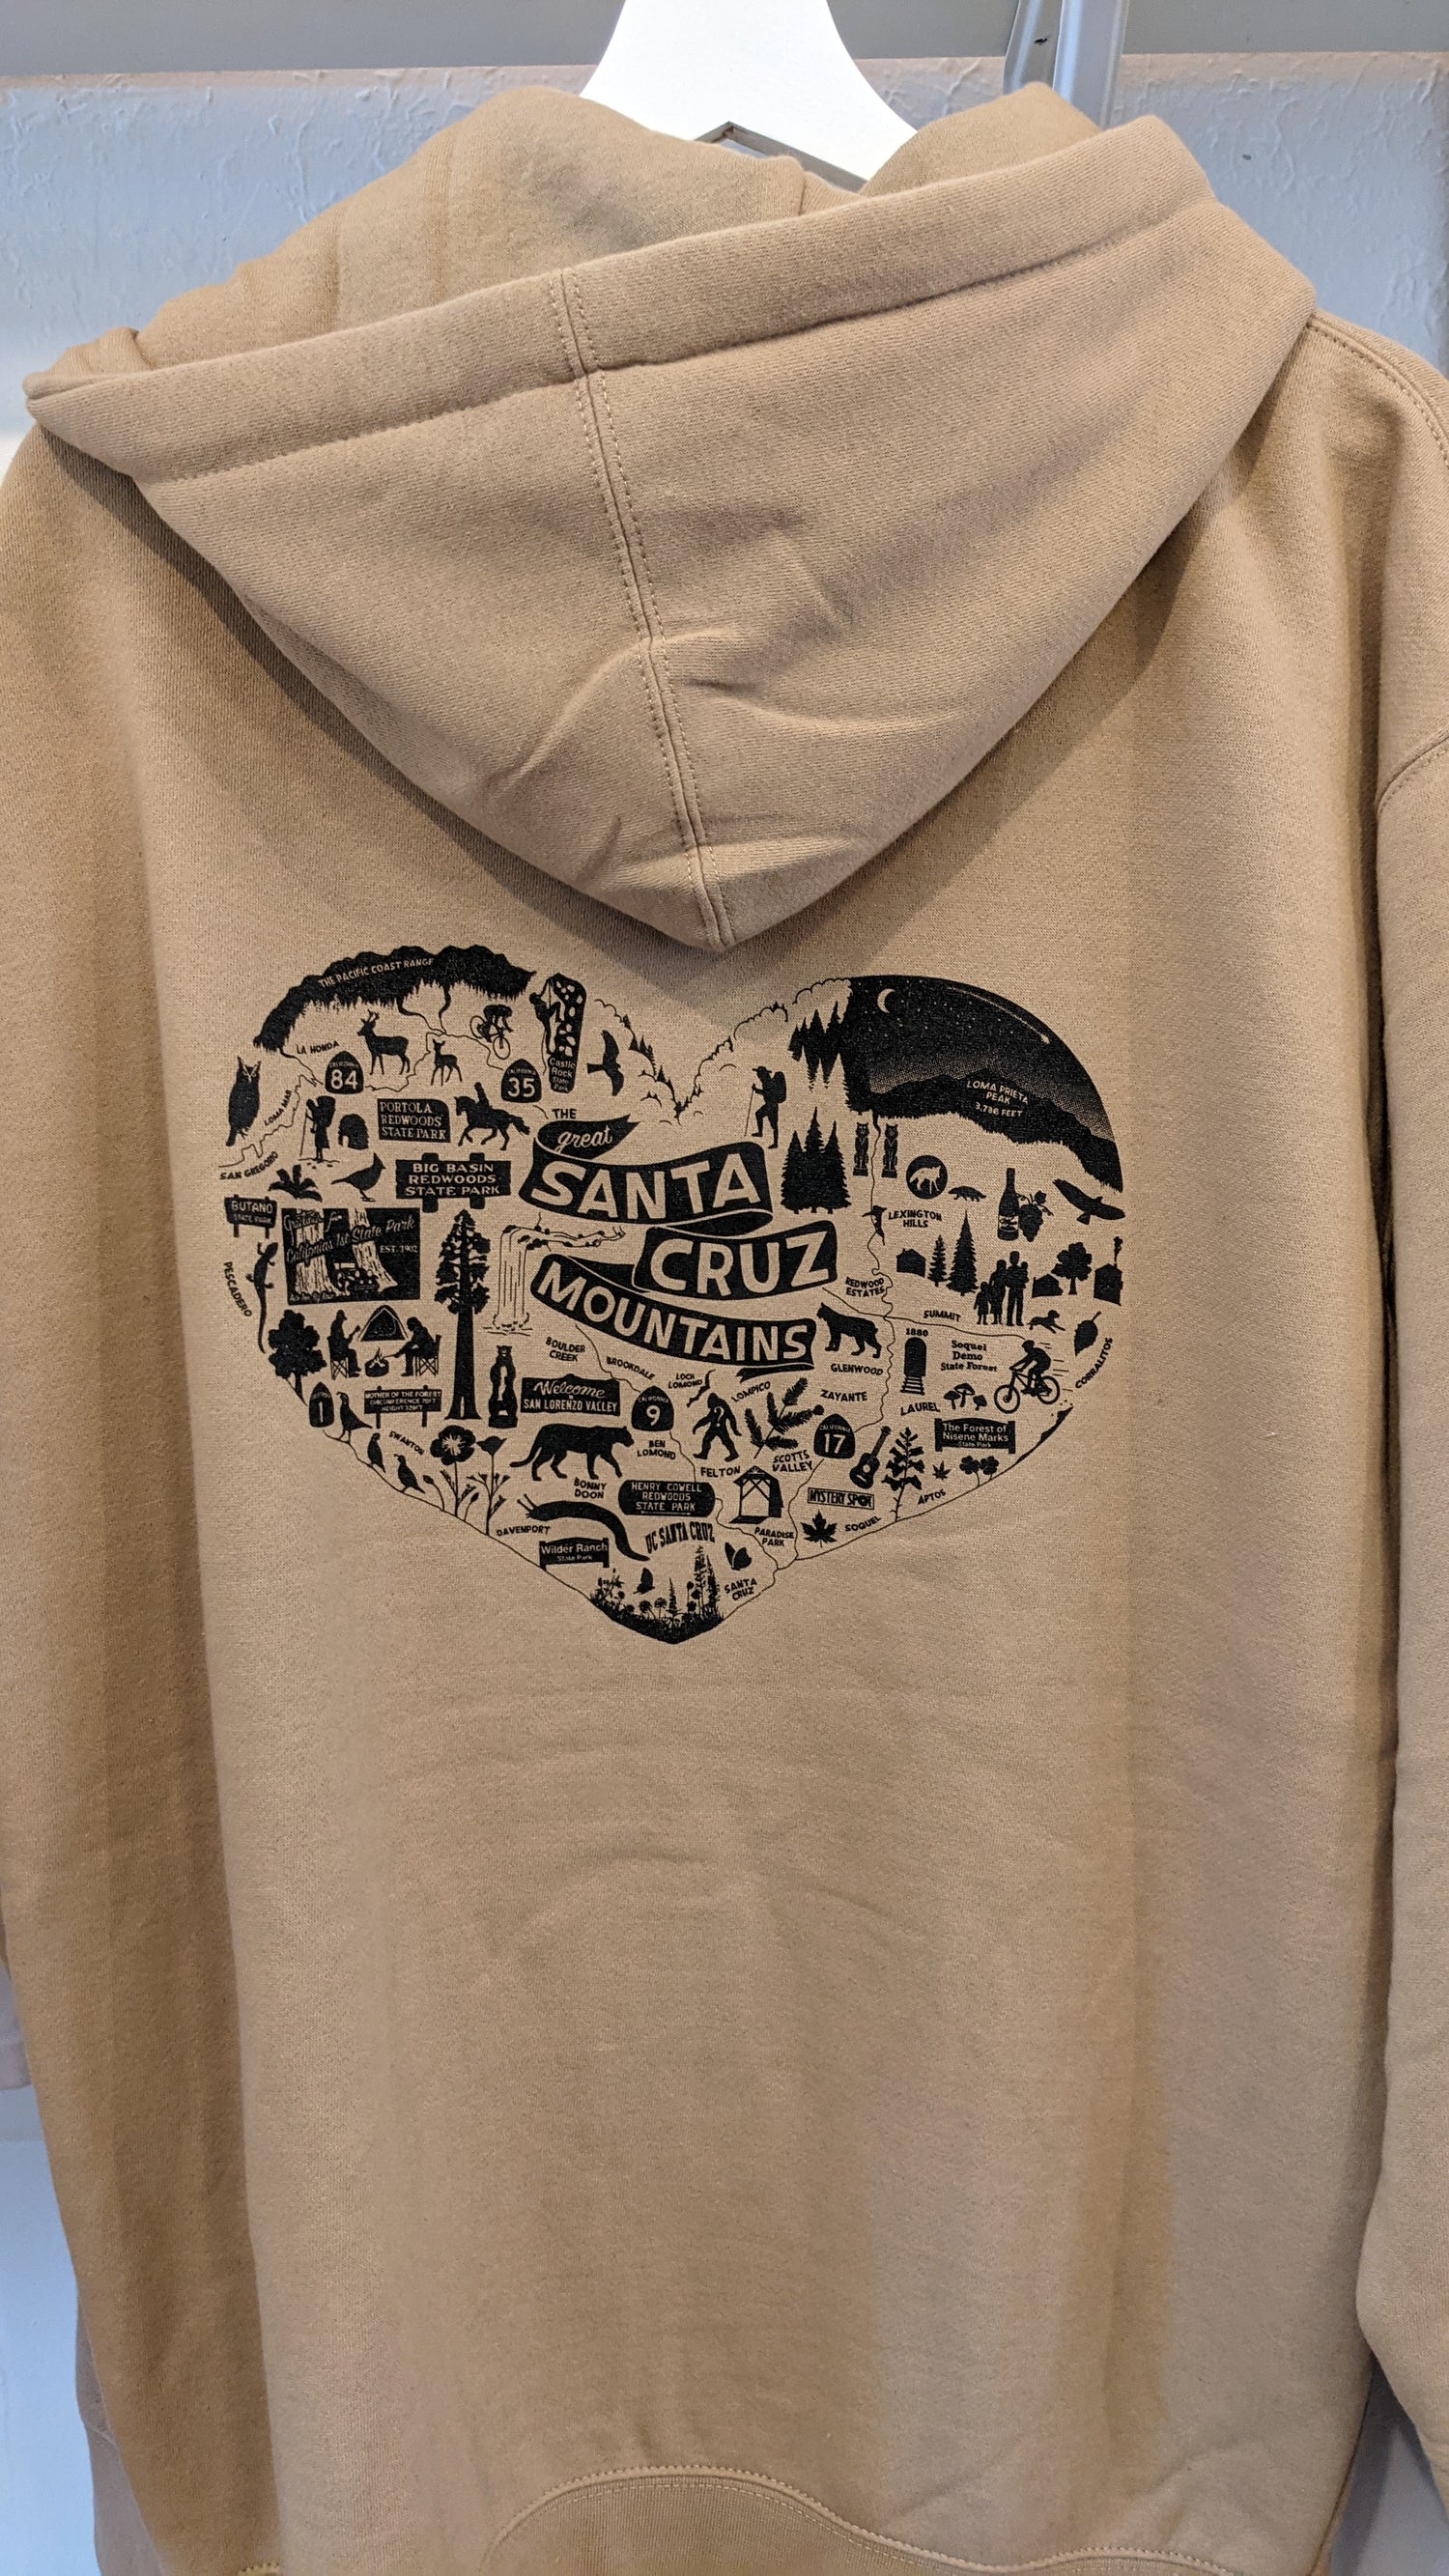 Brown hoodie with heart design on back by Great Santa Cruz Mountains